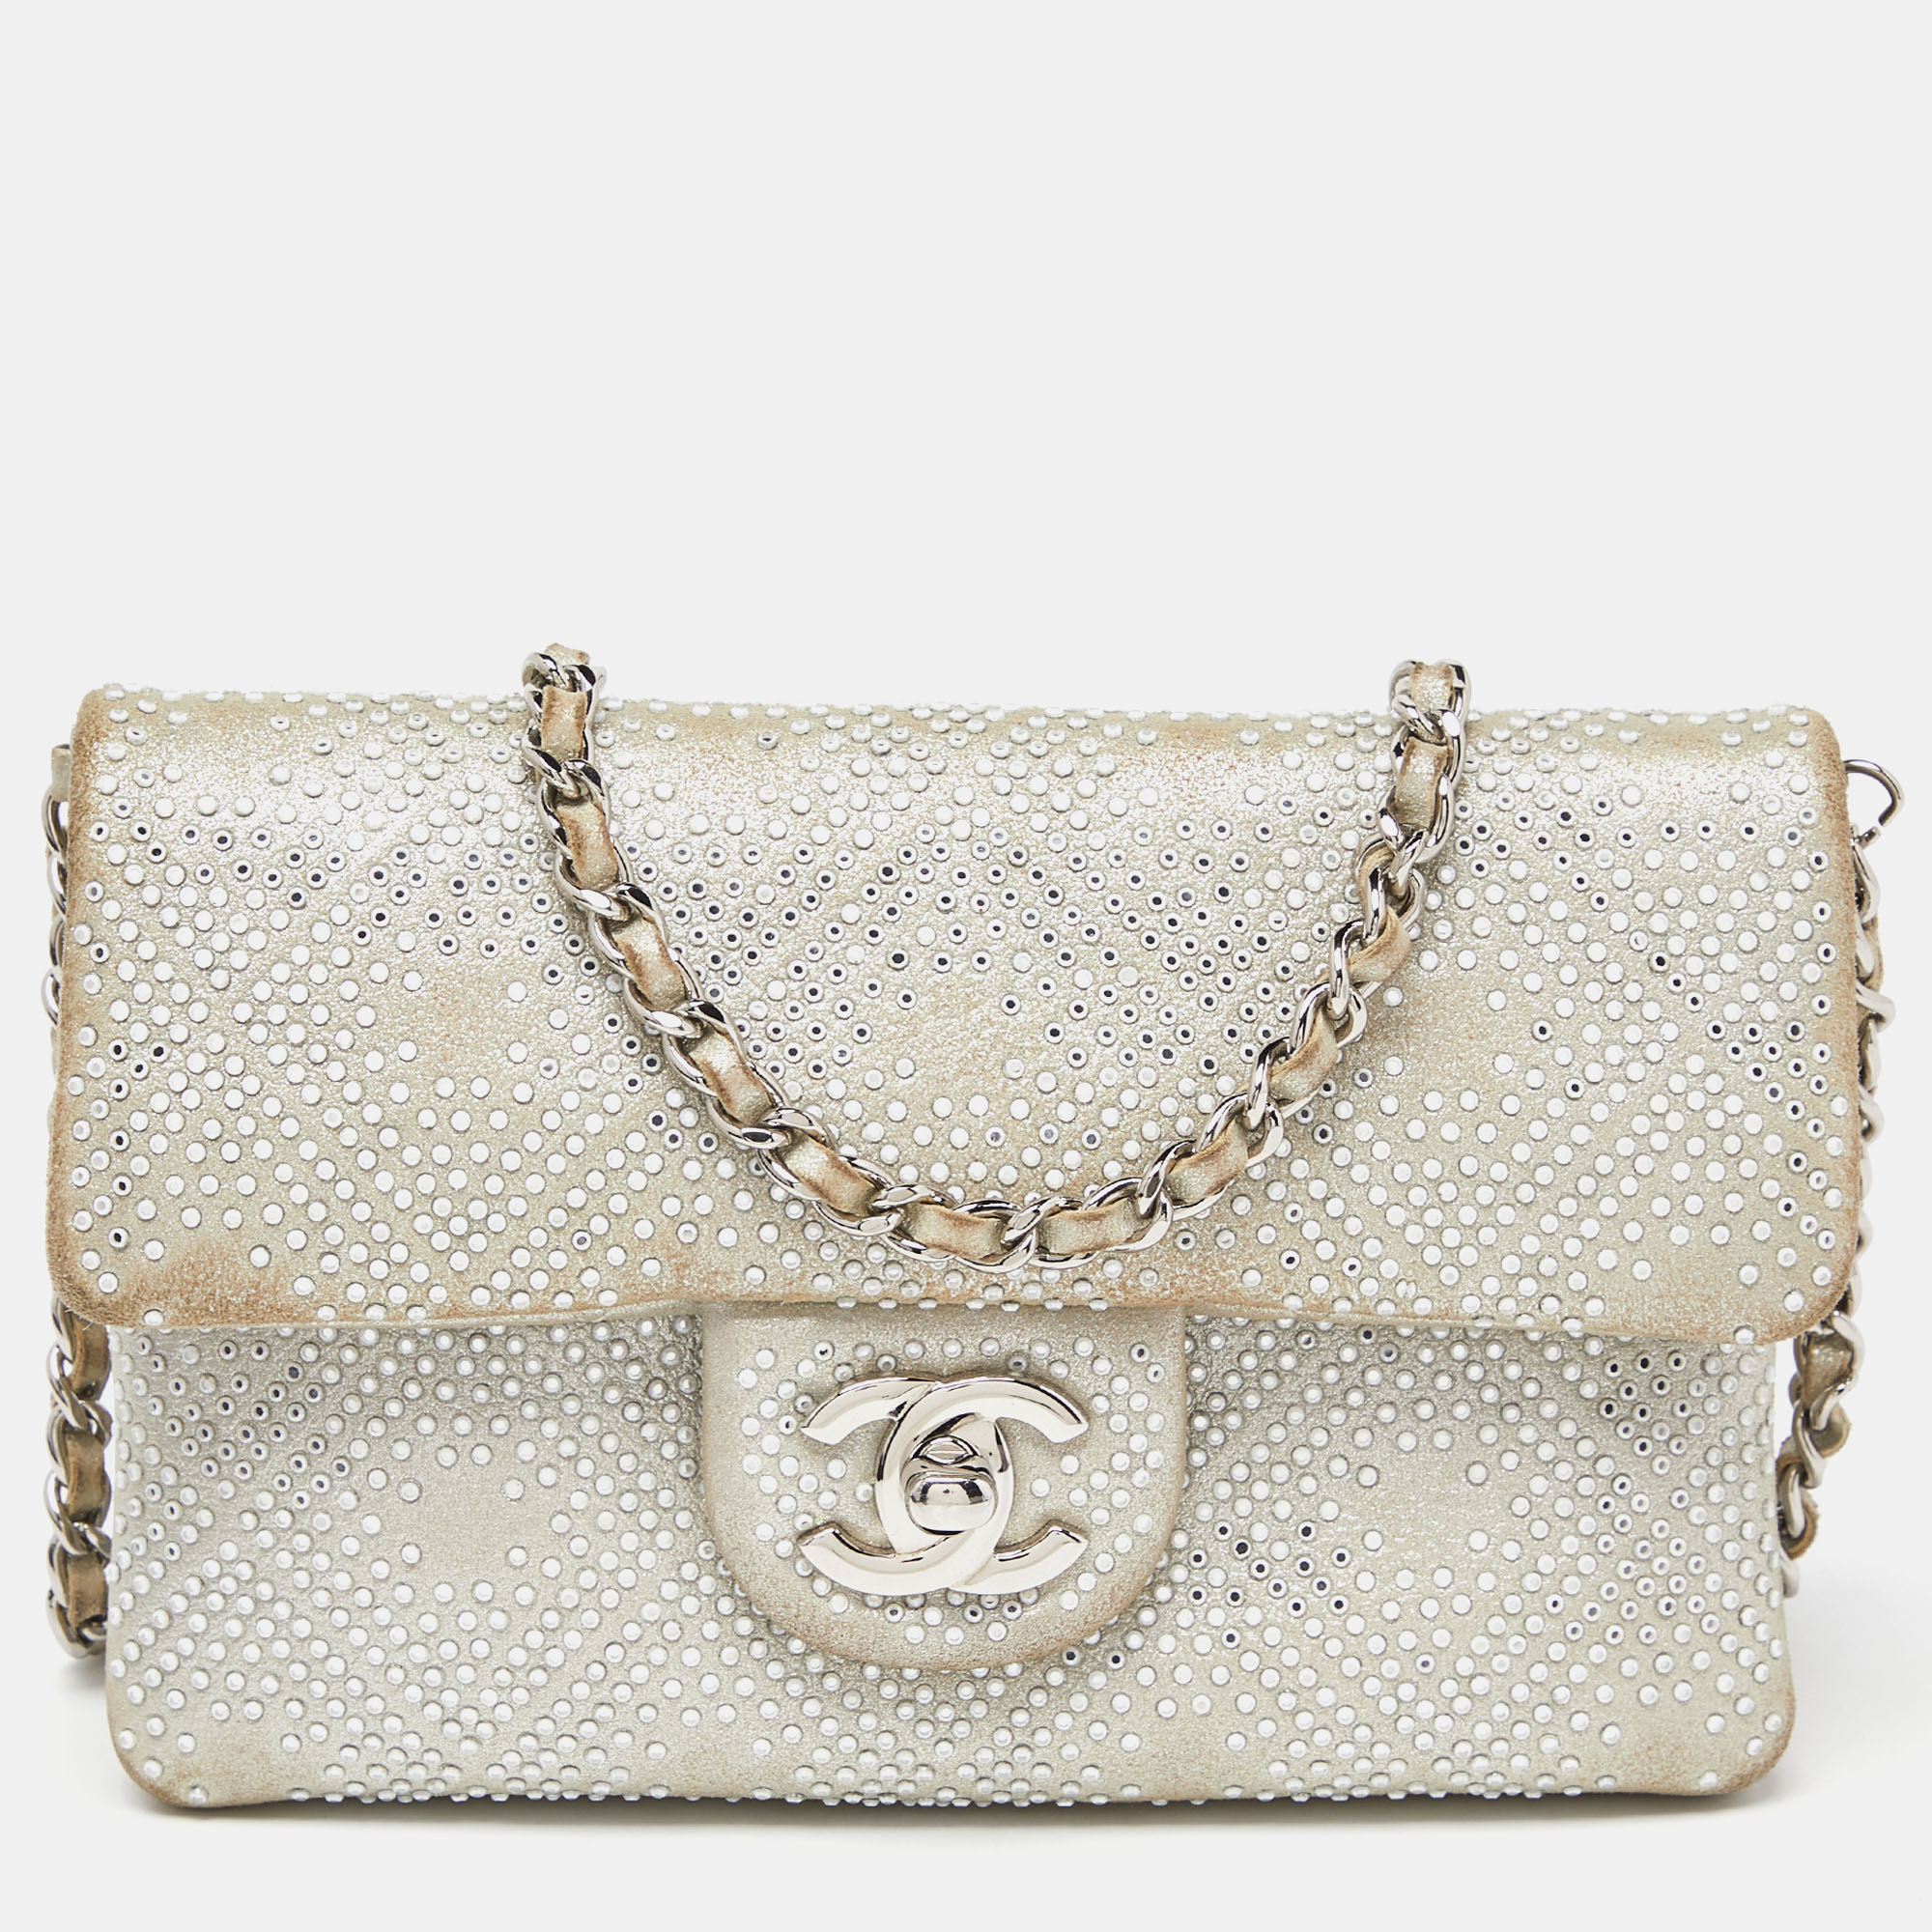 

Chanel Light Grey Quilted Suede Beaded Mineral Nights Bag